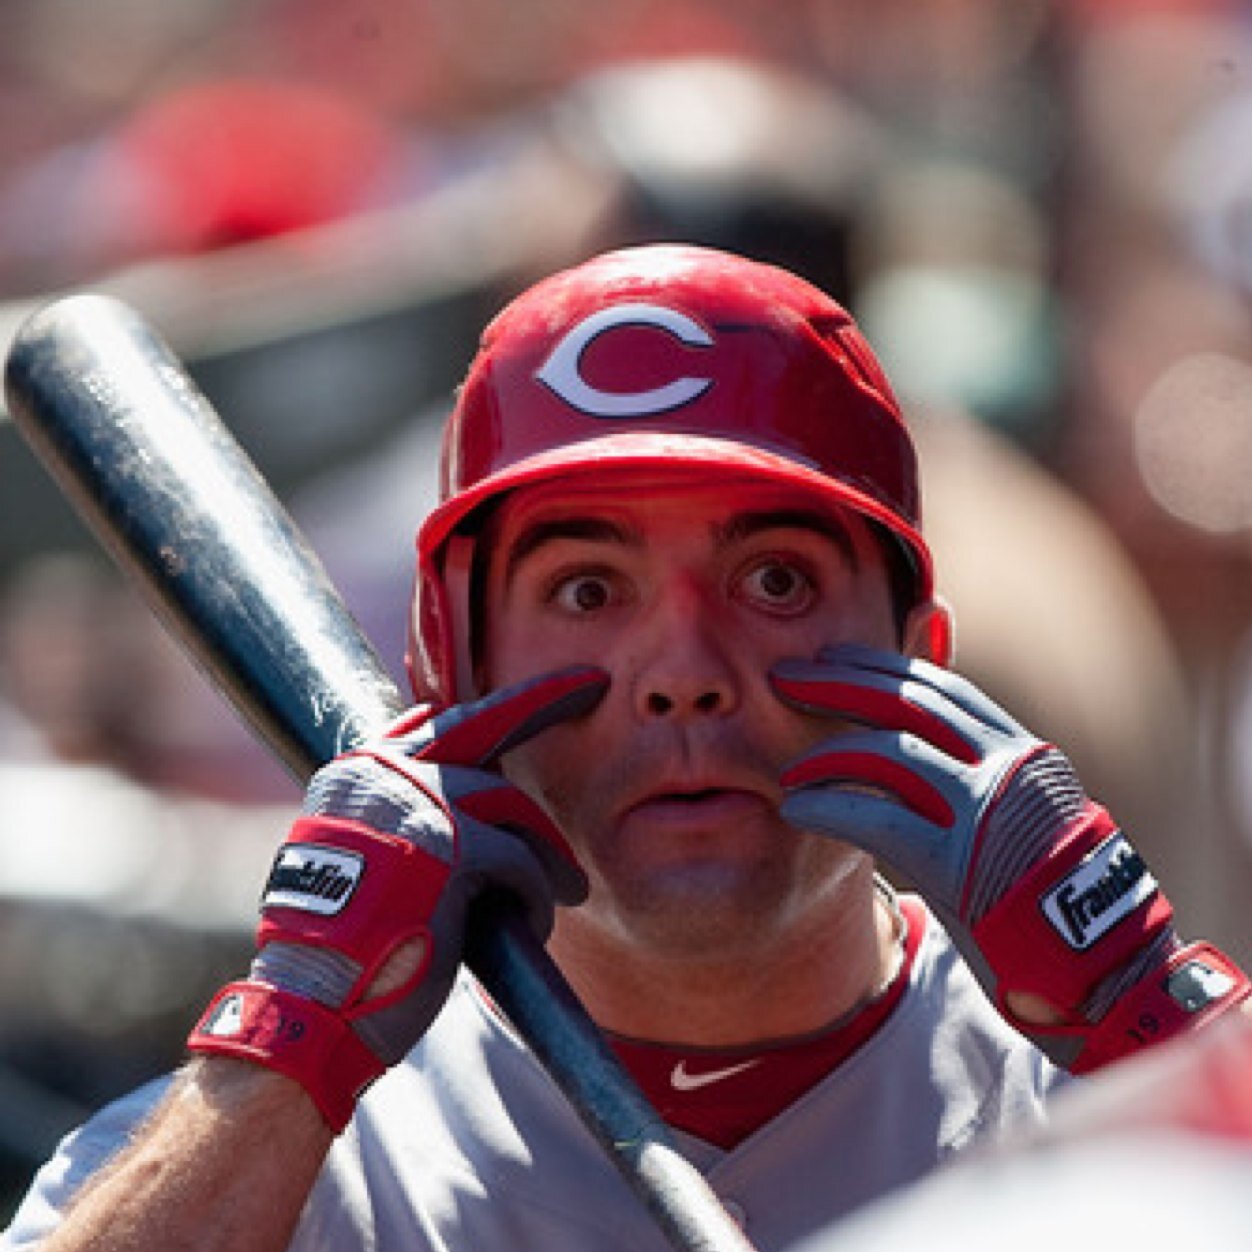 Happen to be the laser precision eyes of Joey Votto. No Lasik, GOD Given.